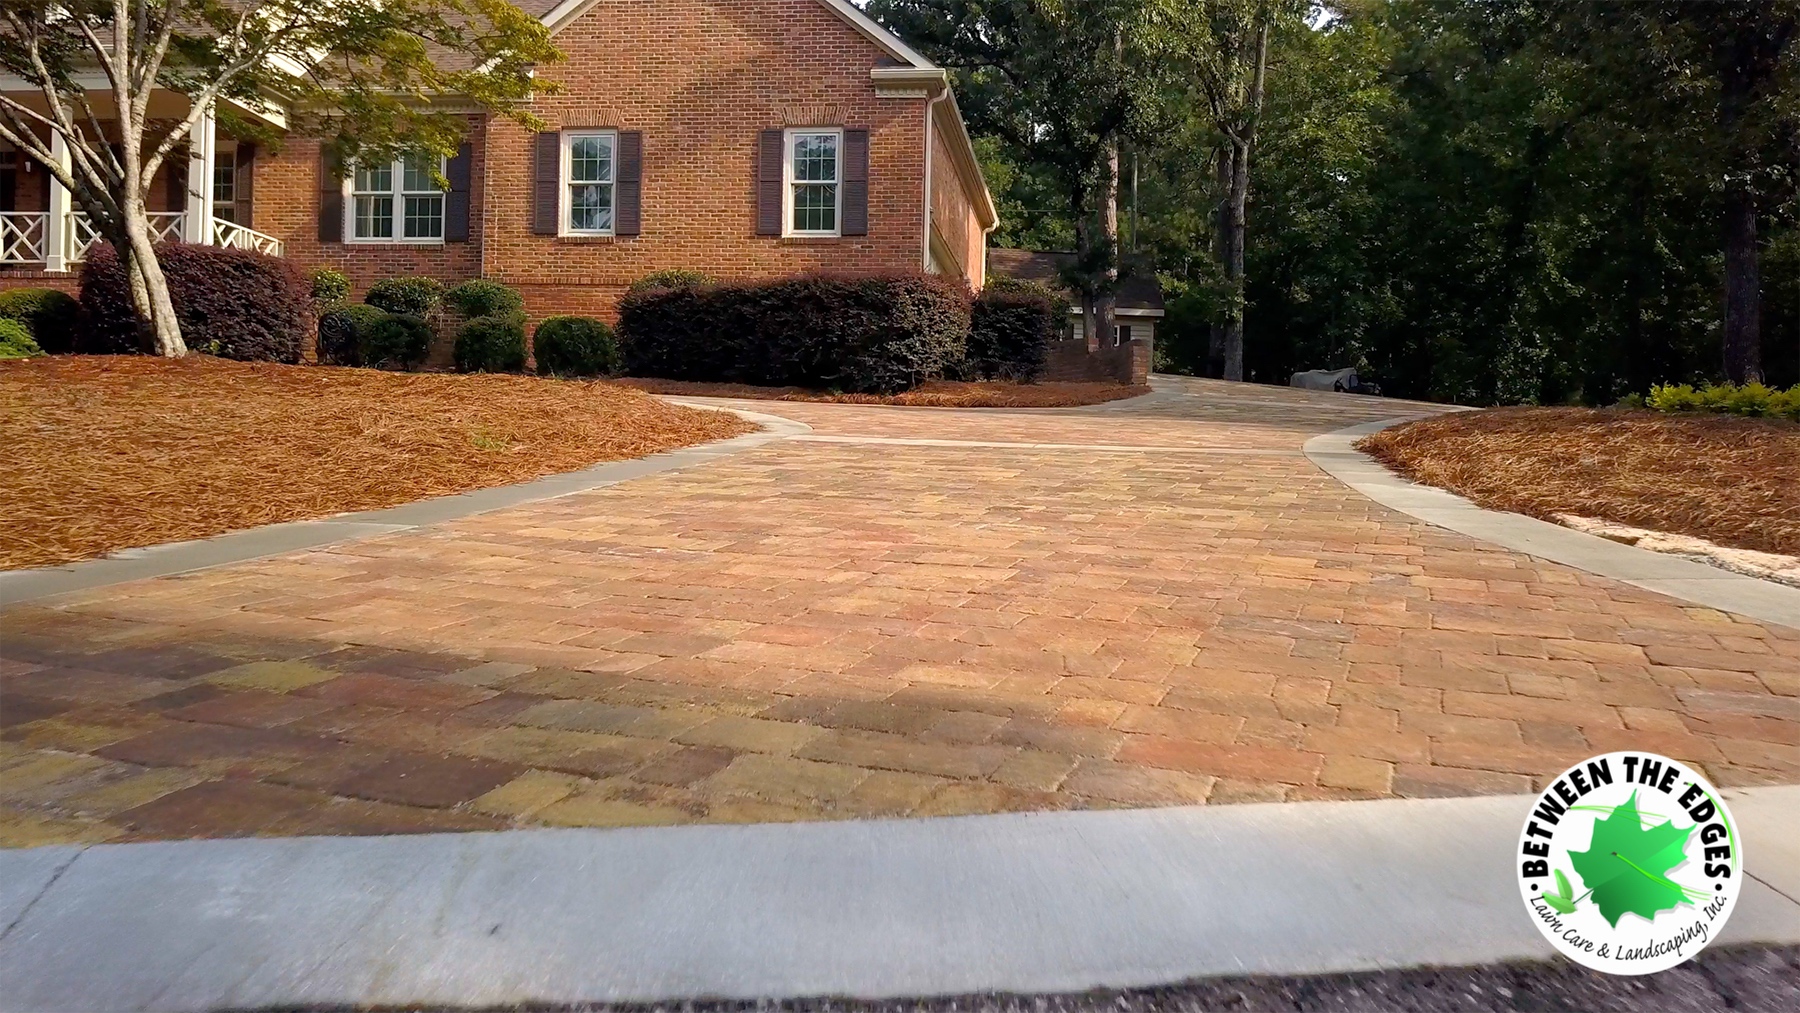 Home Landscaping Lawn Care And, Residential Landscaping Augusta Ga